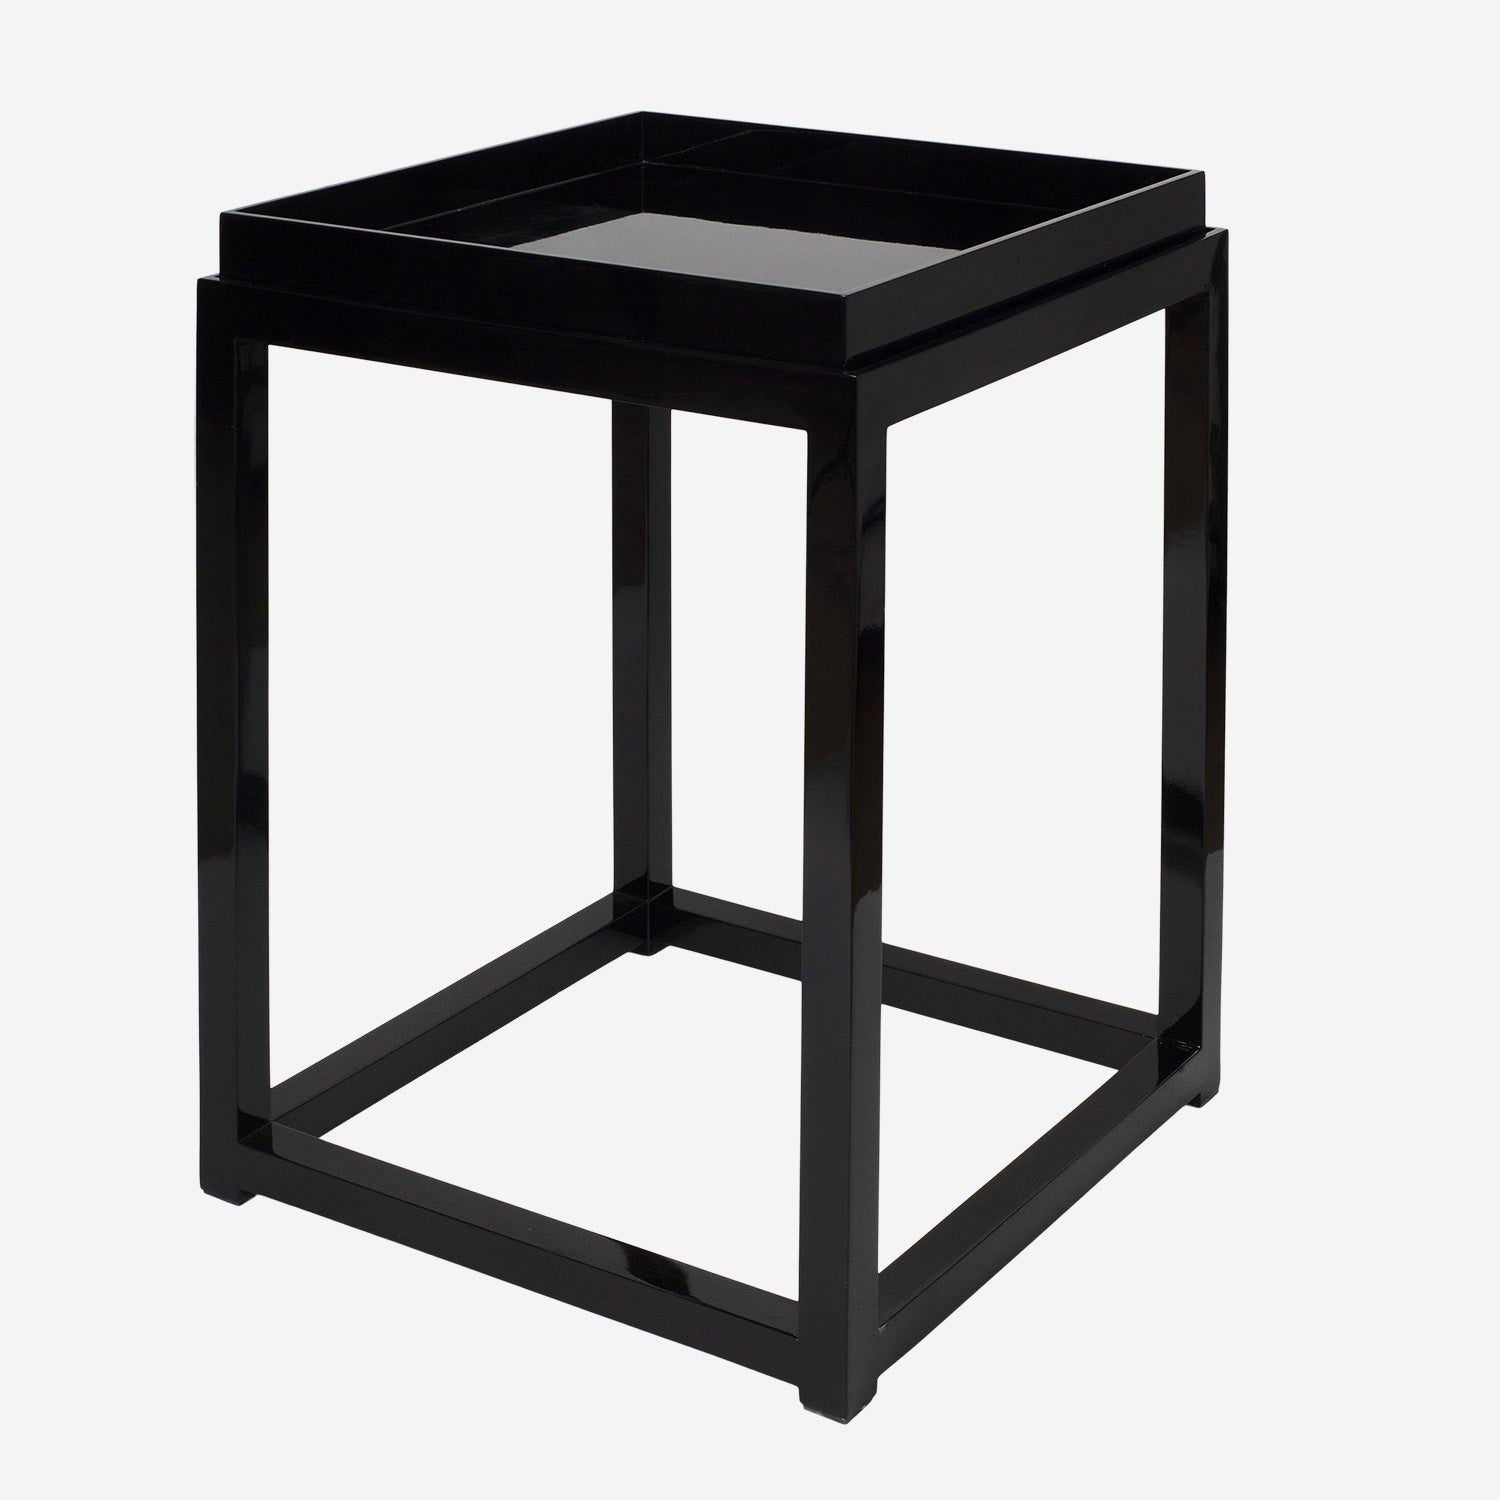 Lacquer table with Tray Tall Black